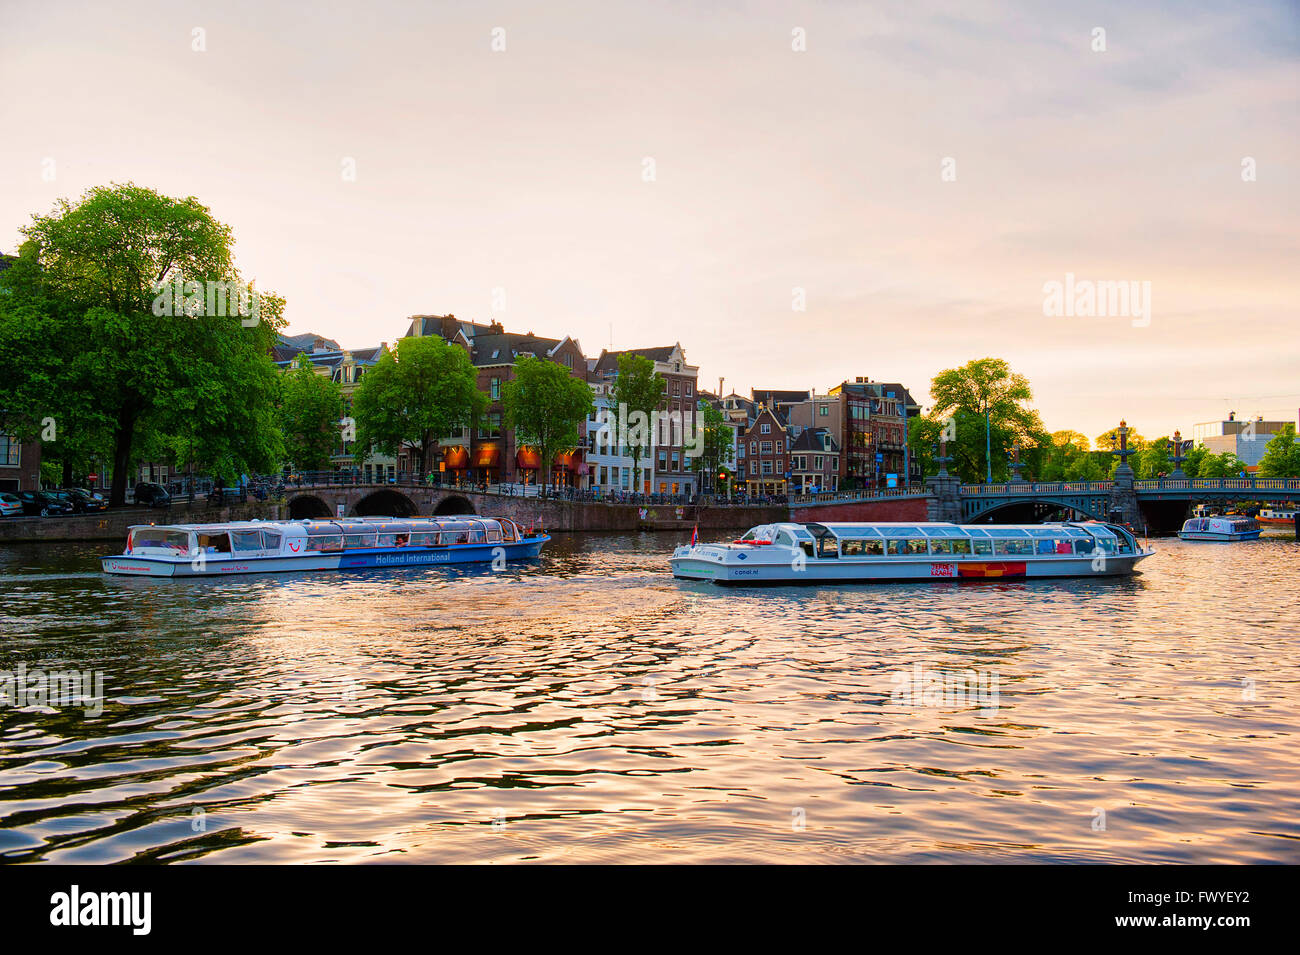 Amsterdam, Netherlands. A boat covered in sunset cruise for tourists on the beautiful canals of the Binnen Amstel River Stock Photo